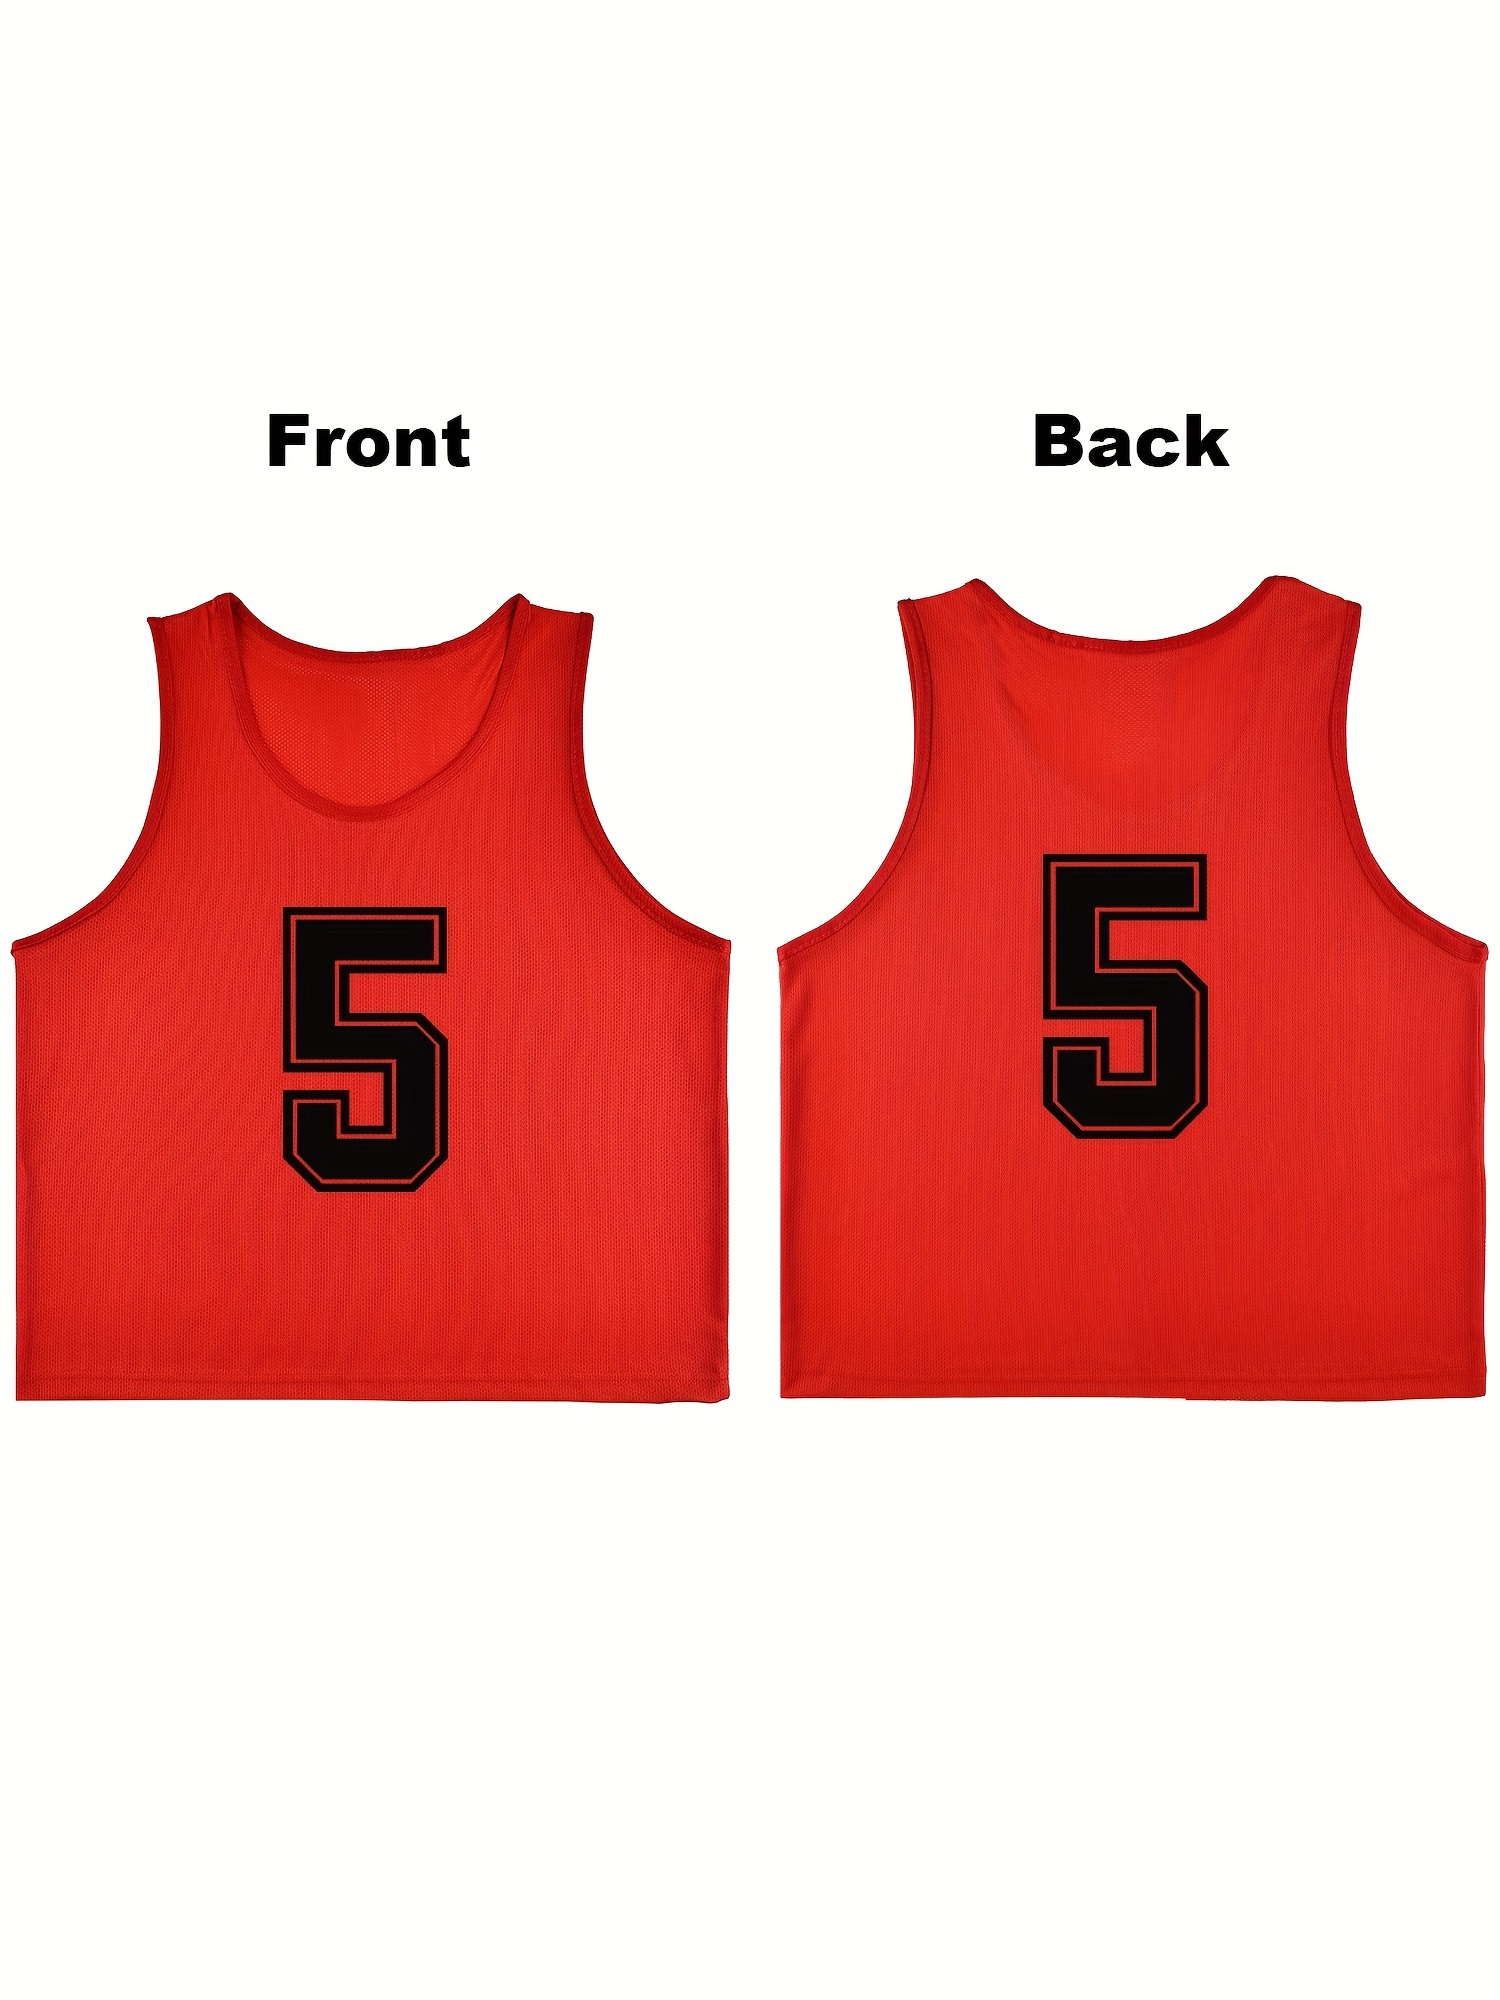 12pcs Solid Sports Pinnies, Numbered 1-12, Practice Vest for Soccer, Football, Basketball Scrimmages - Adults & Kids,Temu